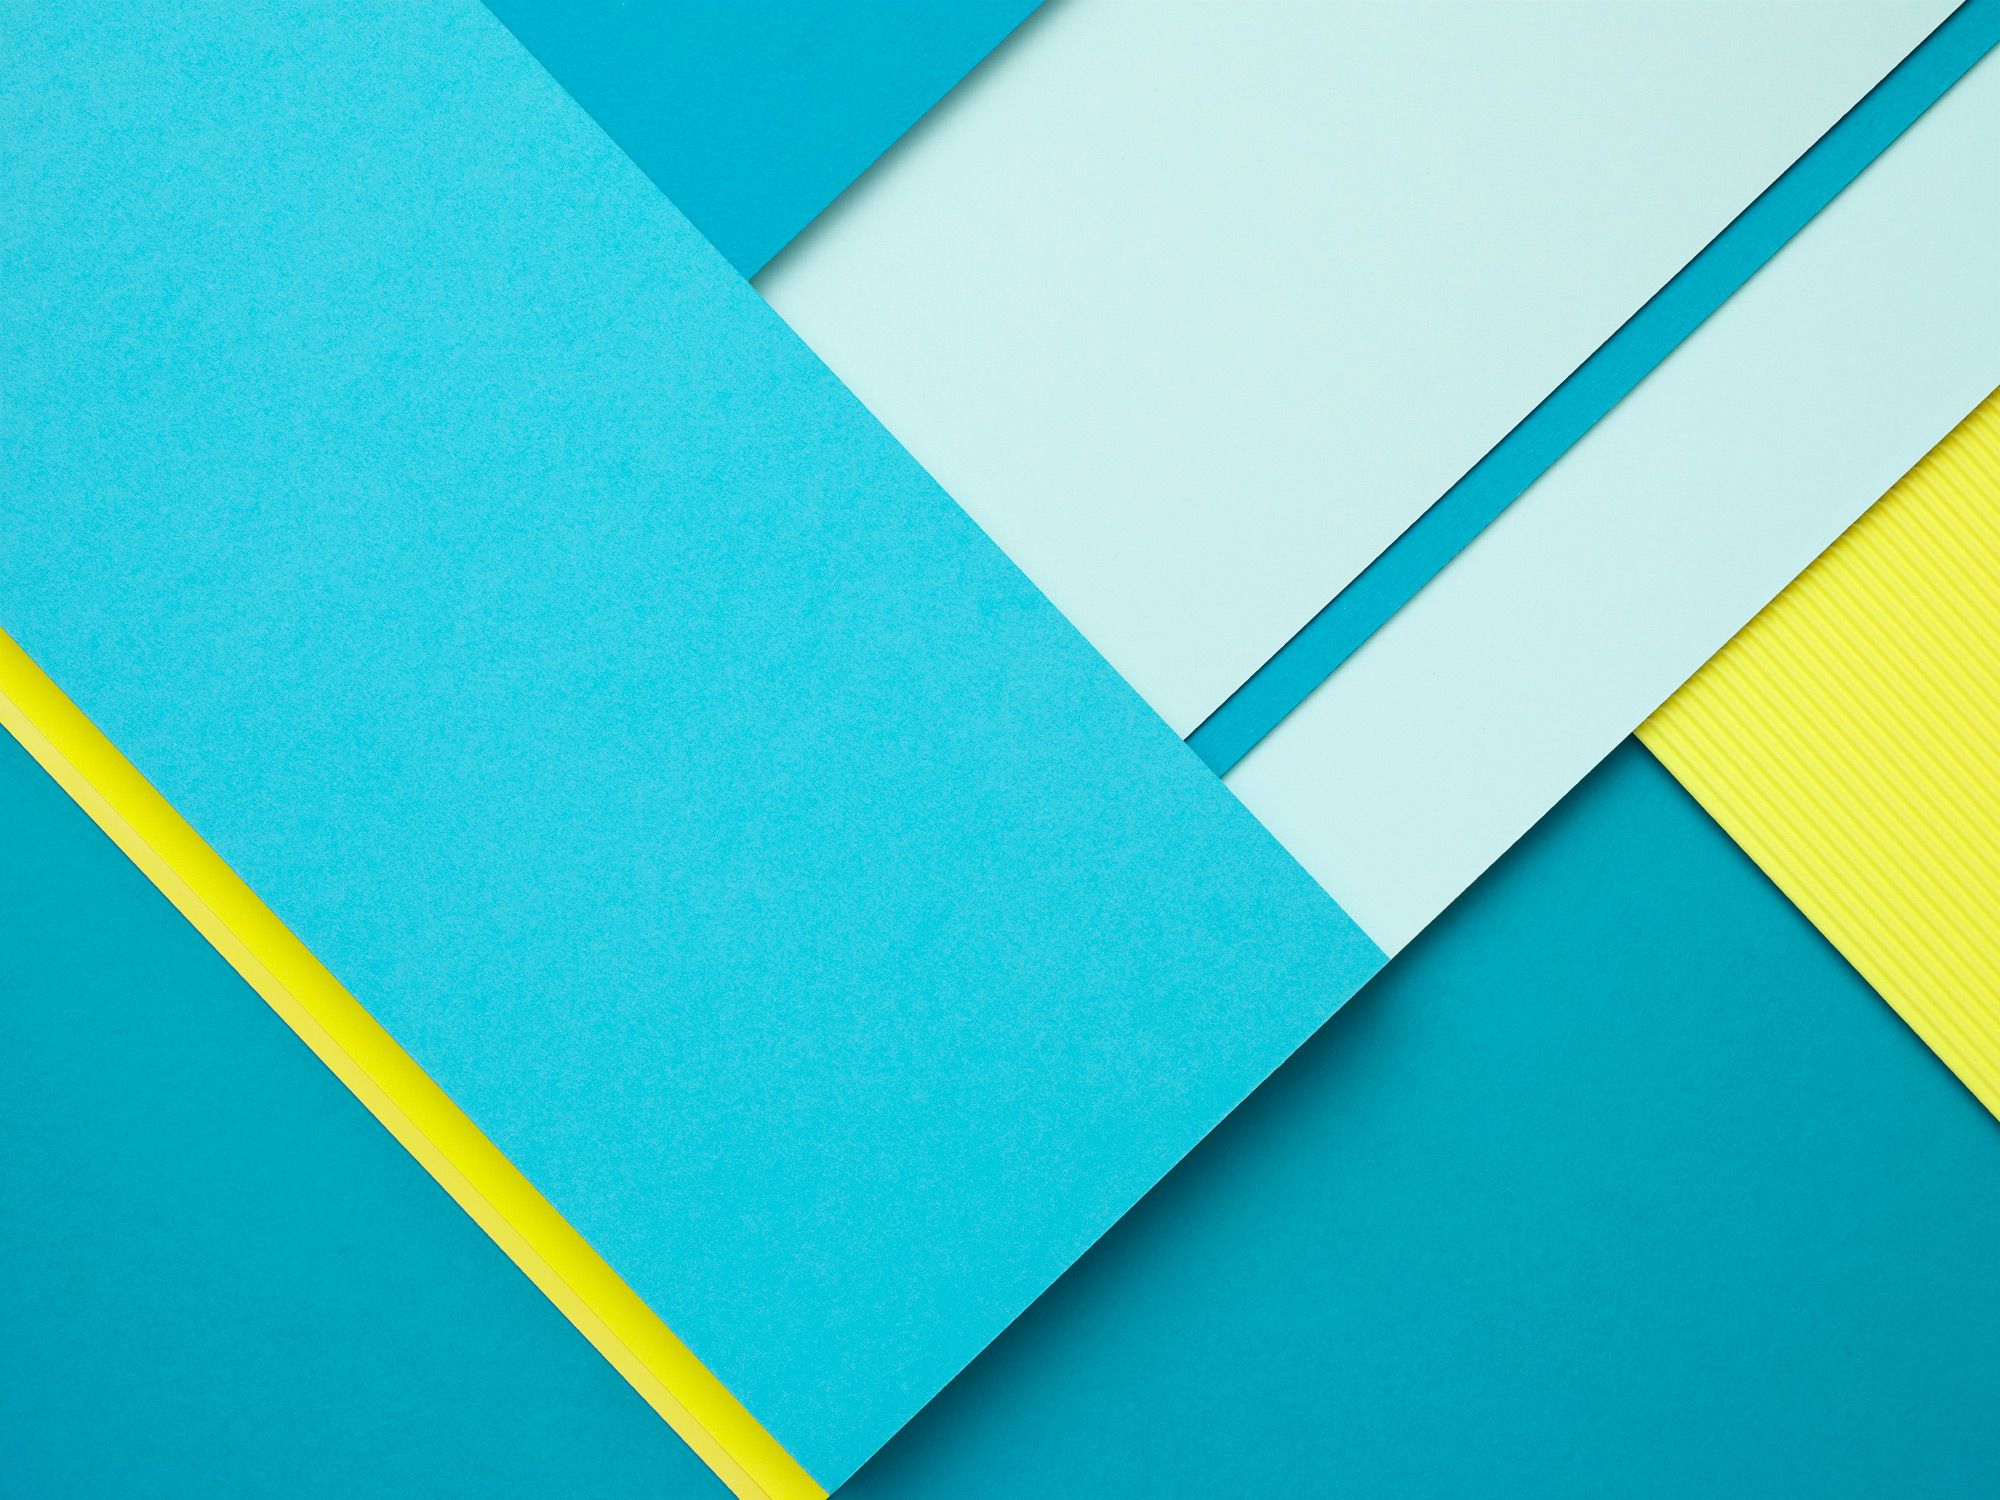 Collection of Material Design Wallpapers - IntraPixel